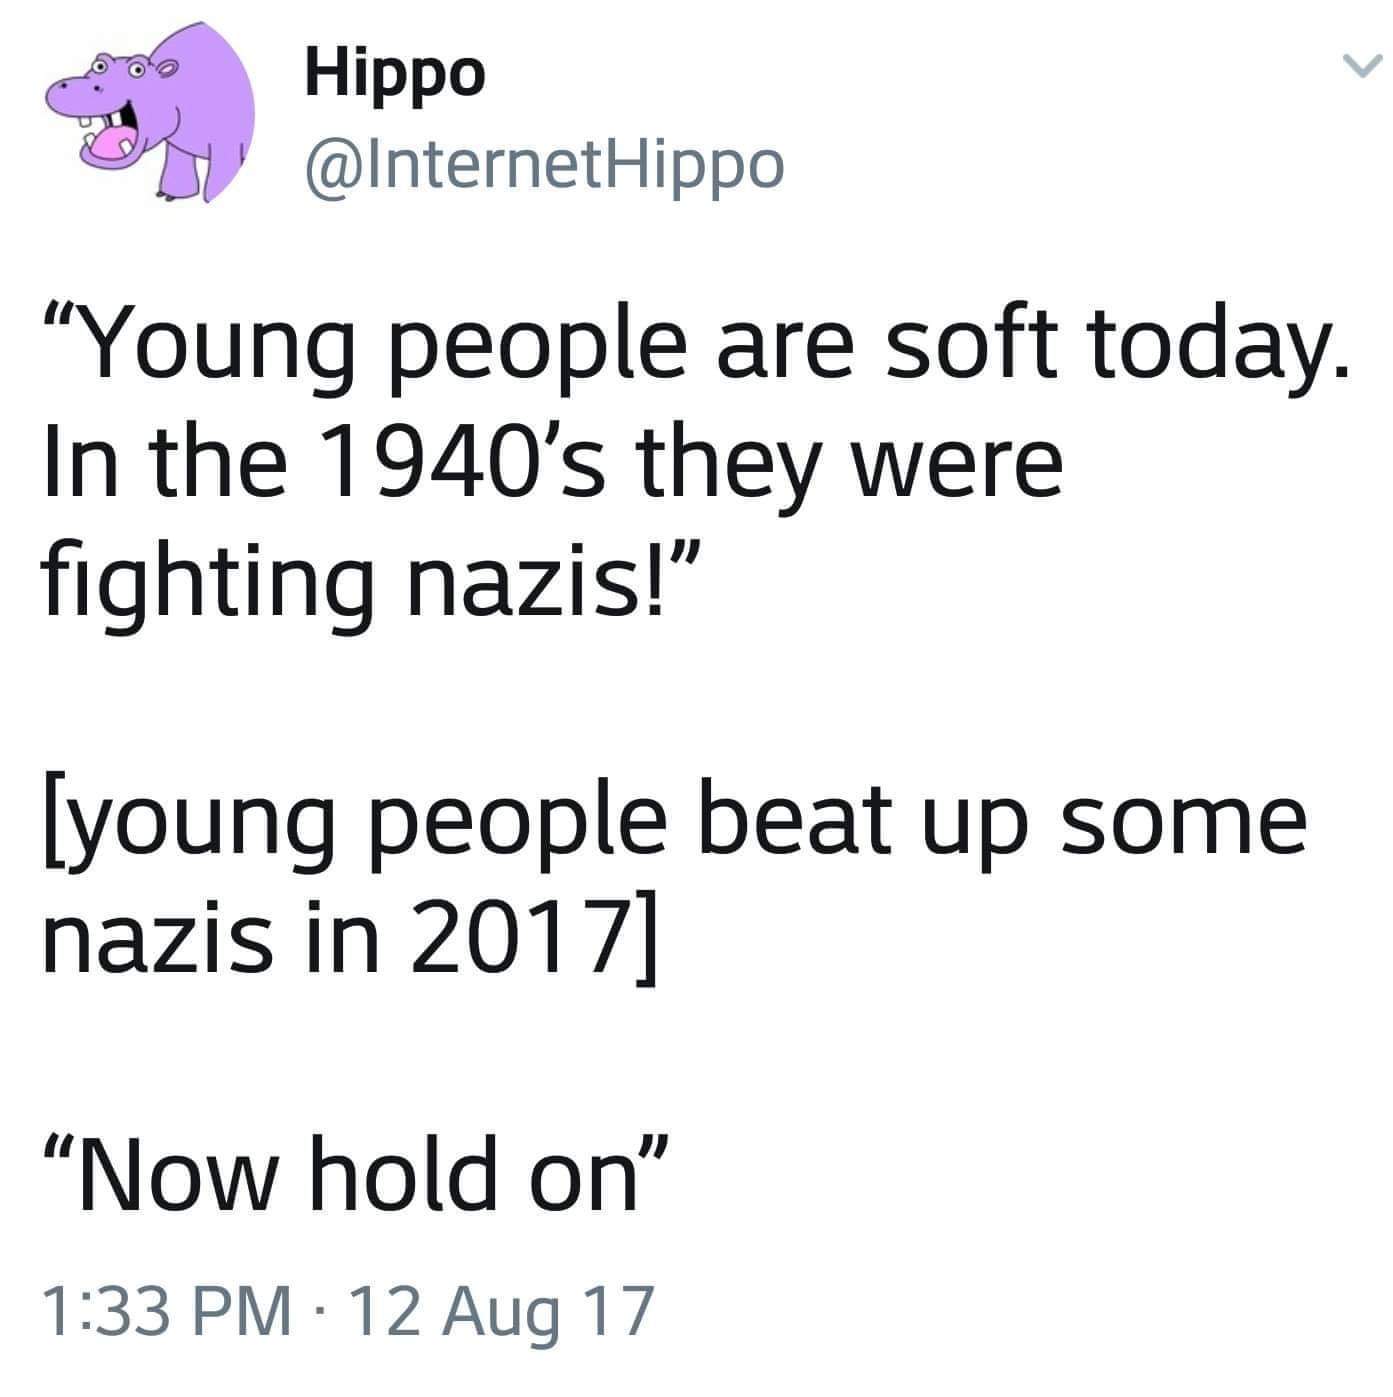 cartoon hippo - Hippo "Young people are soft today In the 1940's they were fighting nazis!" young people beat up some nazis in 2017 Now hold on" 12 Aug 17